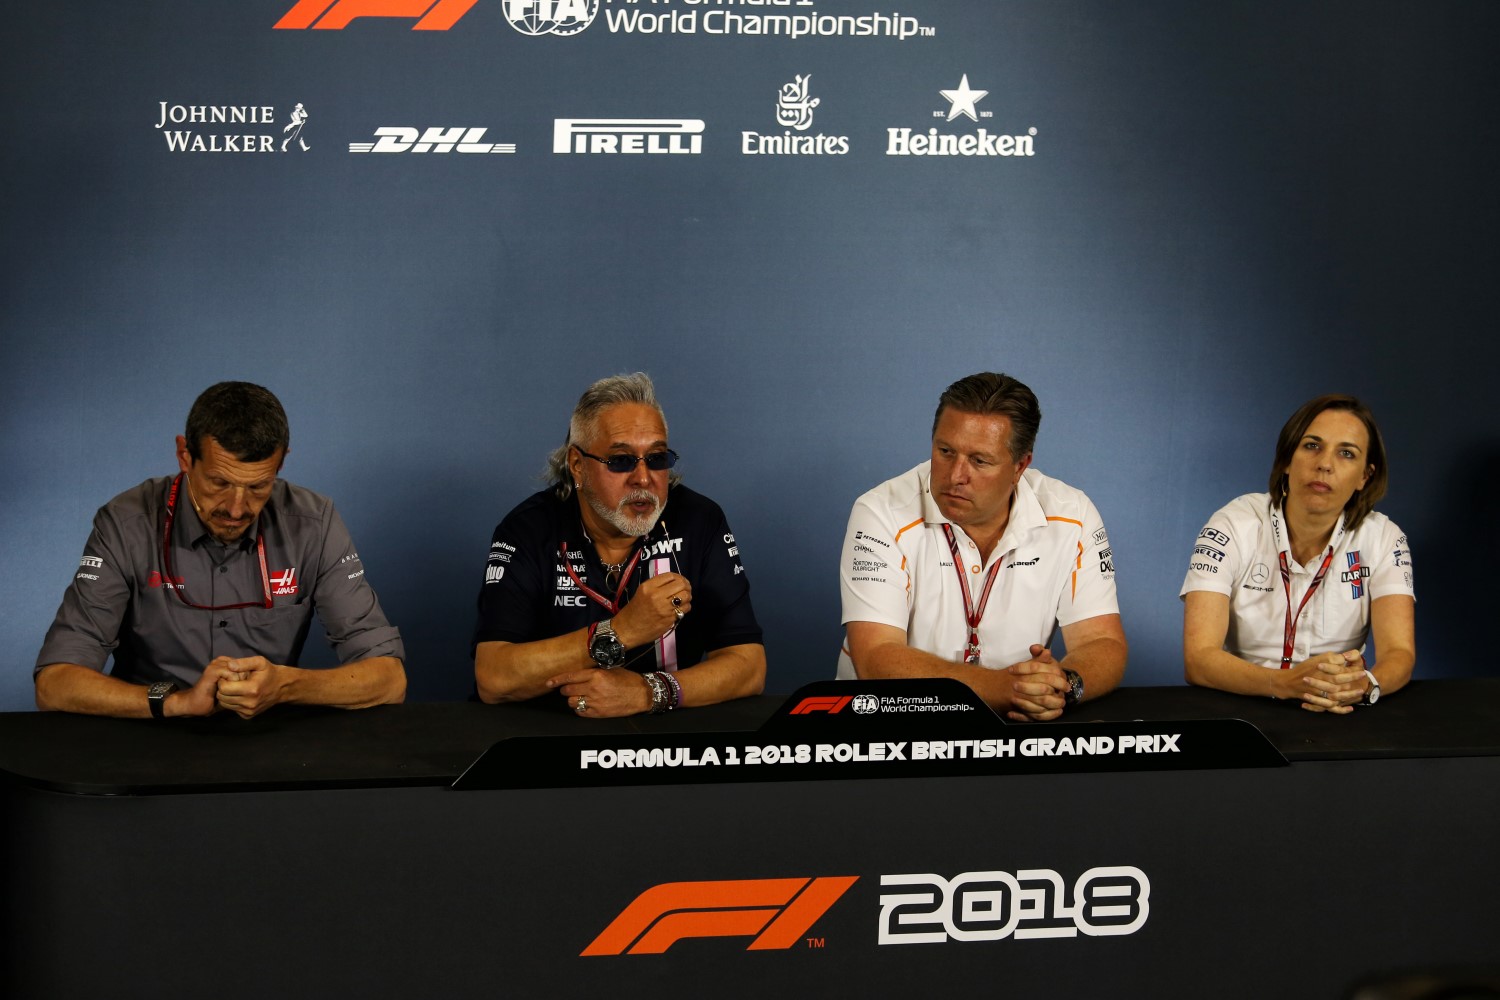 The two on the right want to screw Force India